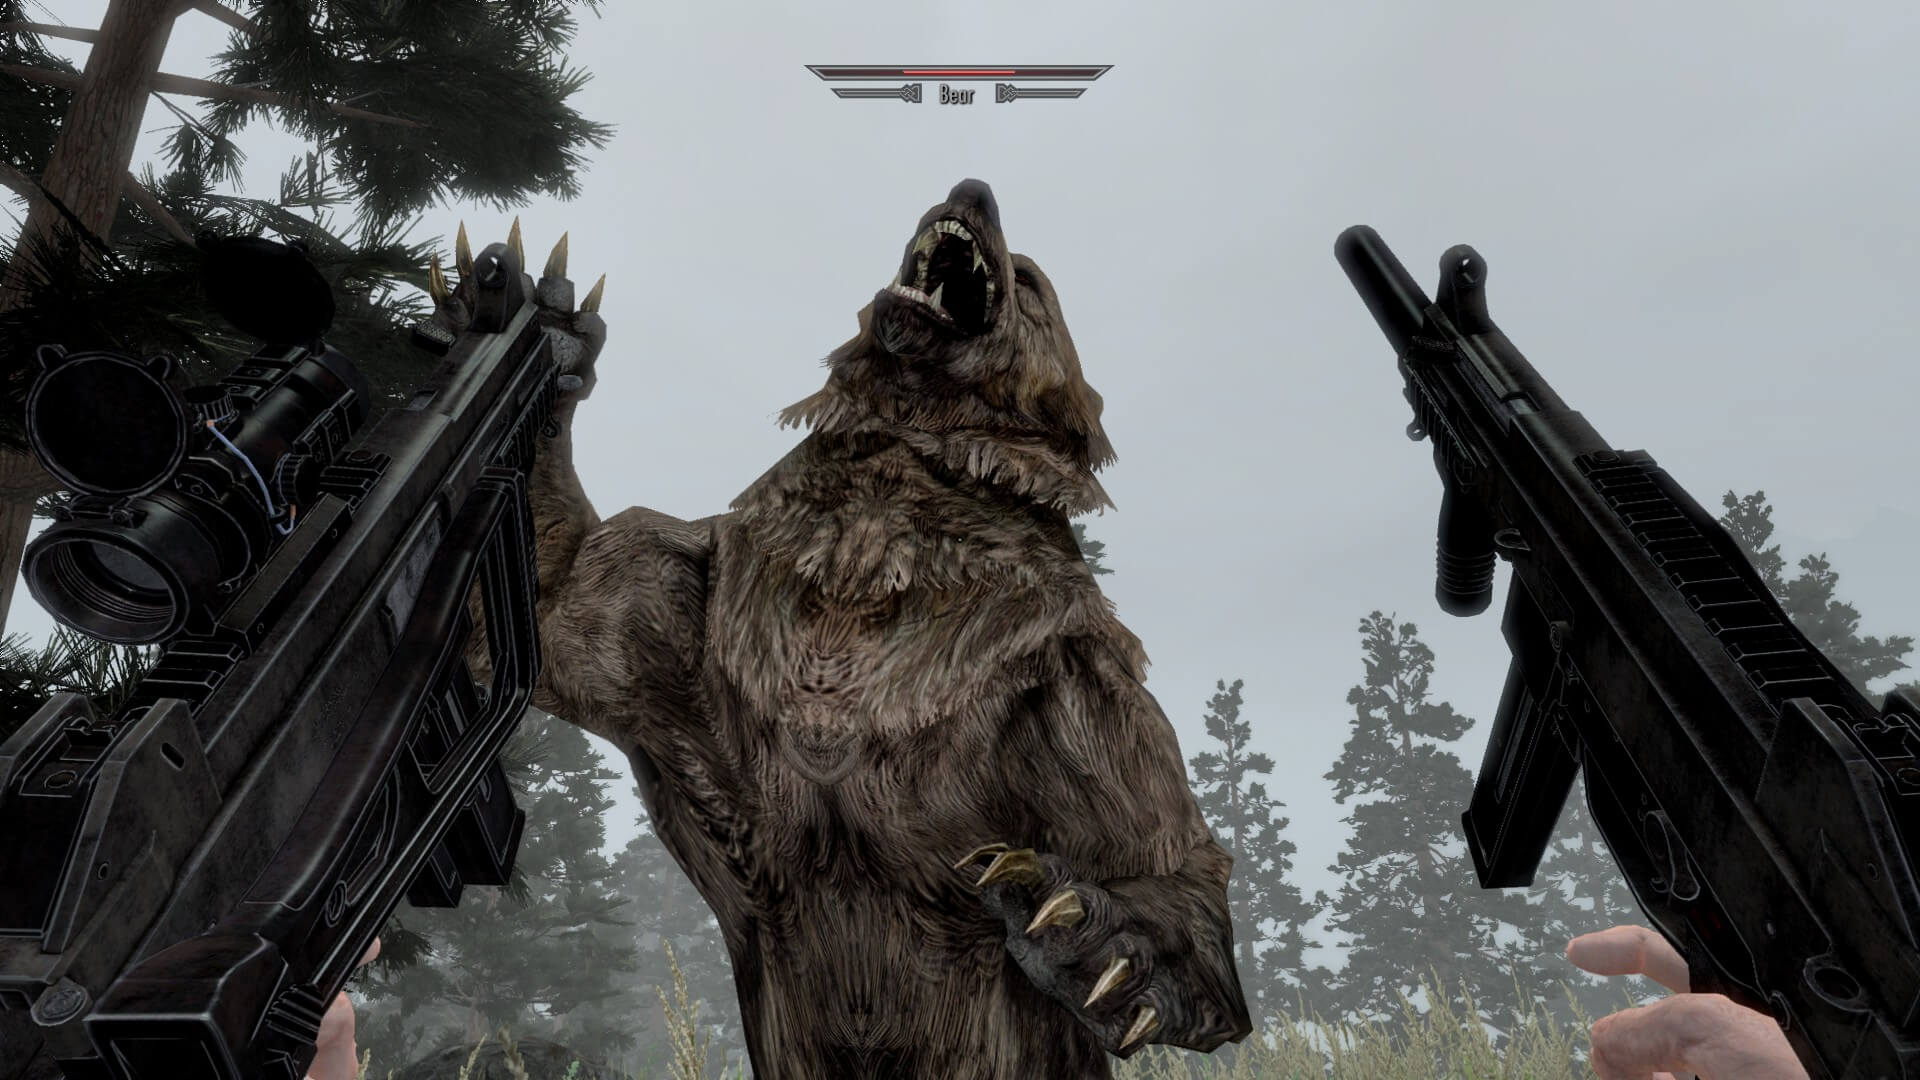 10 awesome 'Skyrim: Special Edition' mods you can download on PS4